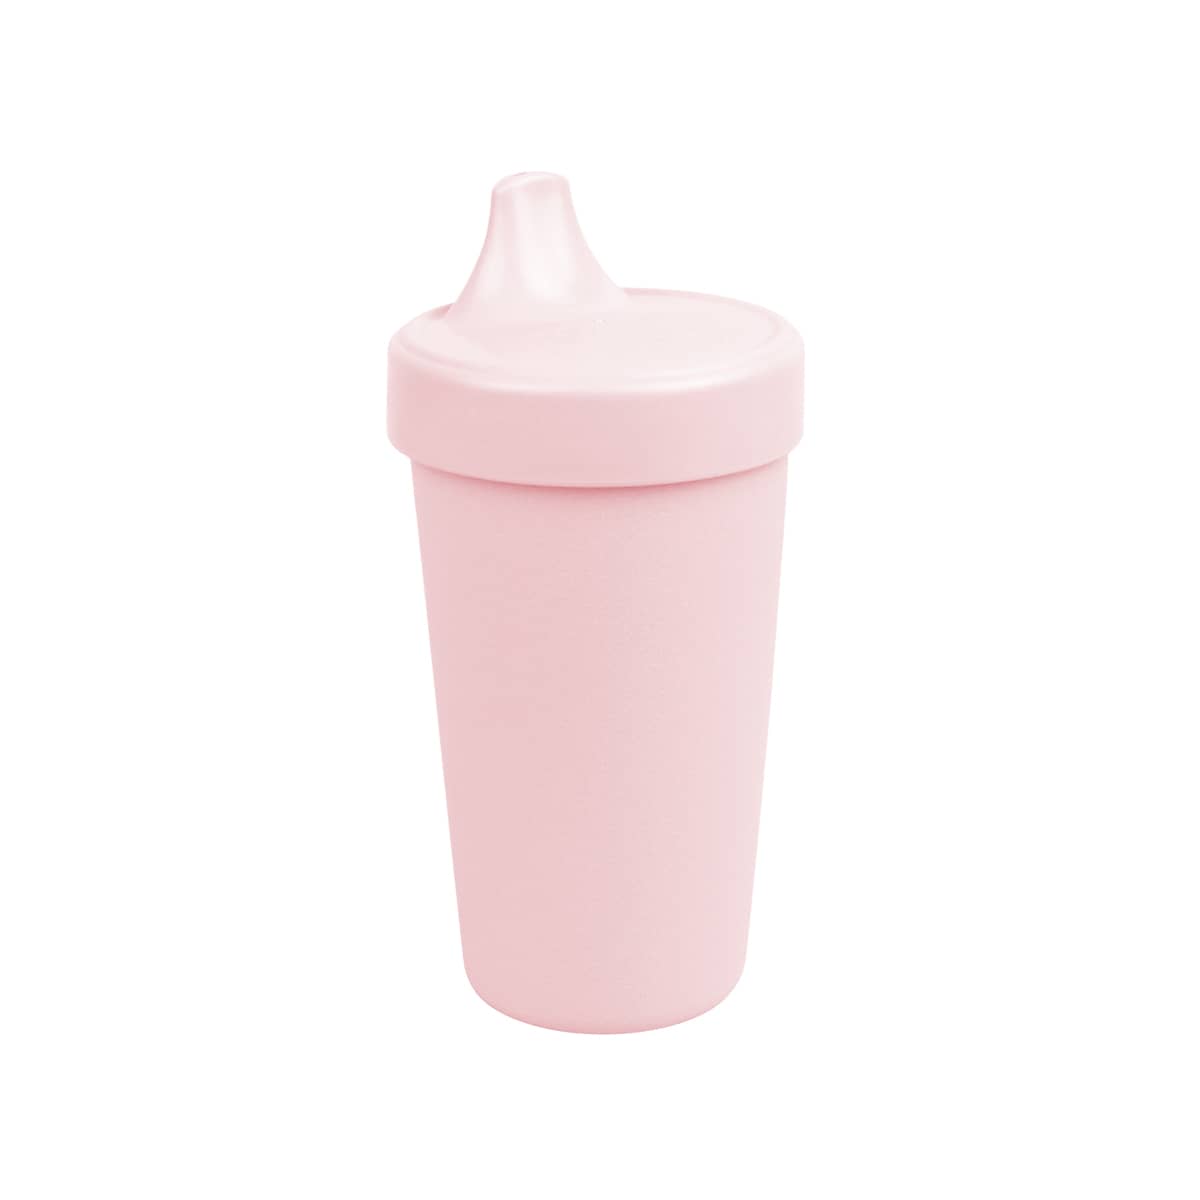 Re-Play Recycled No-Spill Sippy Cup - Ice Pink